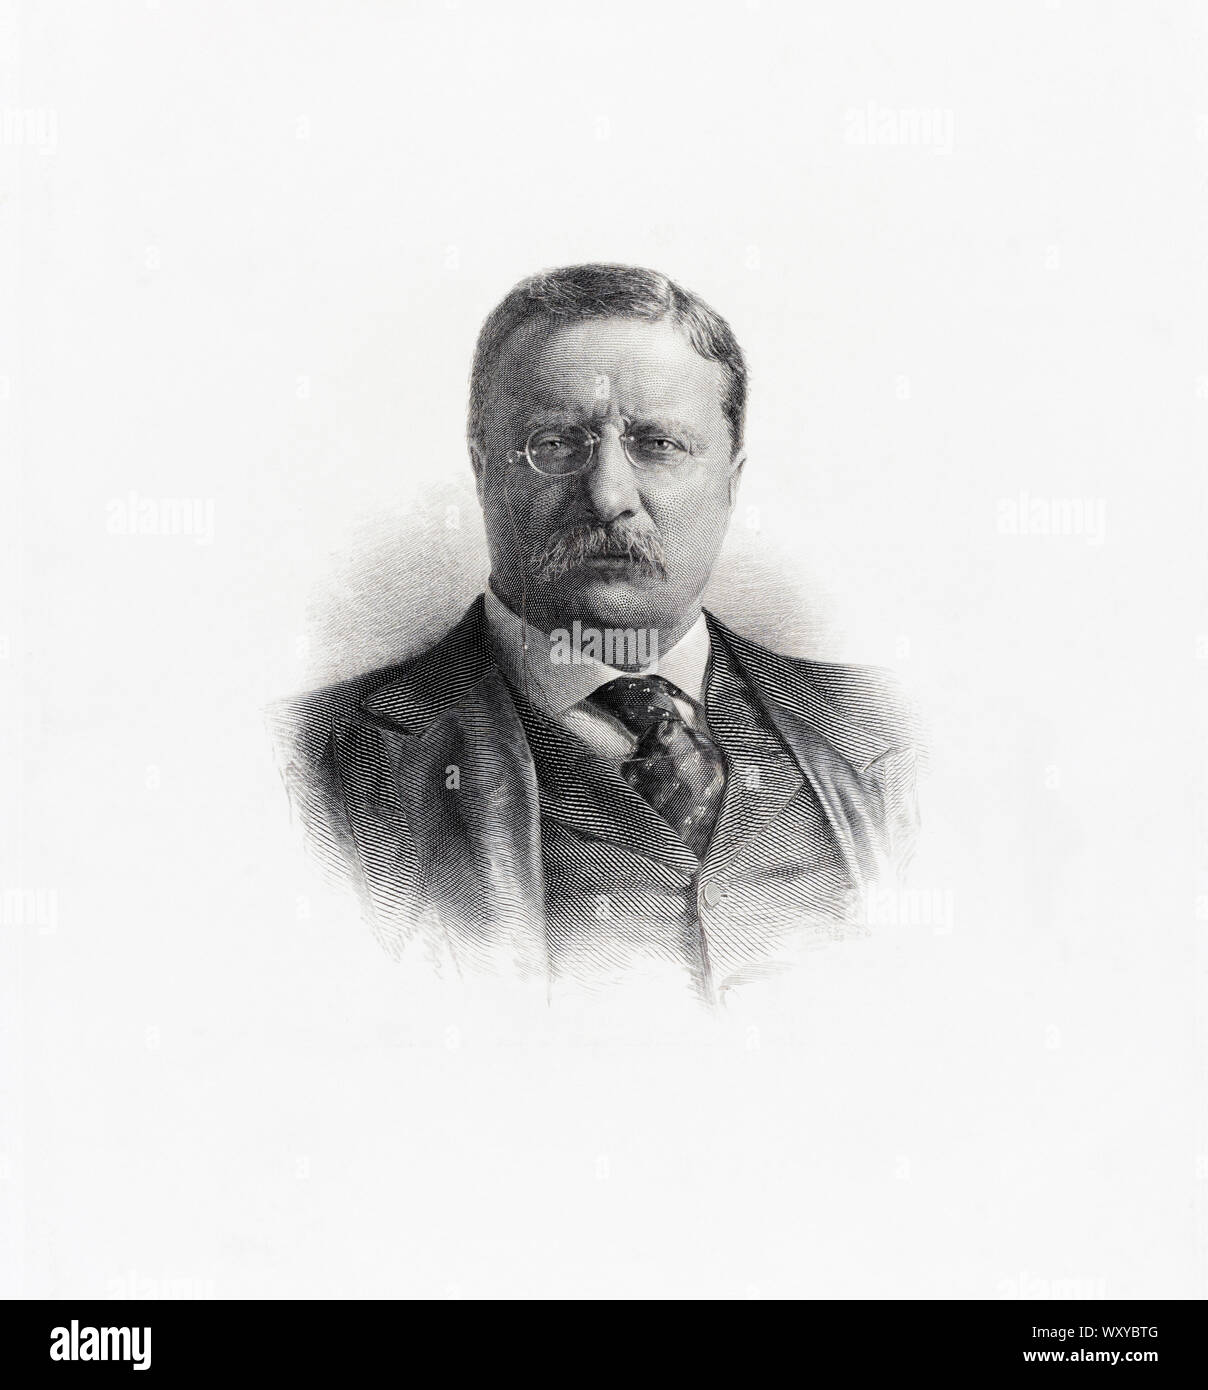 Theodore Roosevelt (1858-1919) 26th President of the United States 1901-09, Head and Shoulders Portrait, Engraving by G.F.C. Smillie, 1908 Stock Photo